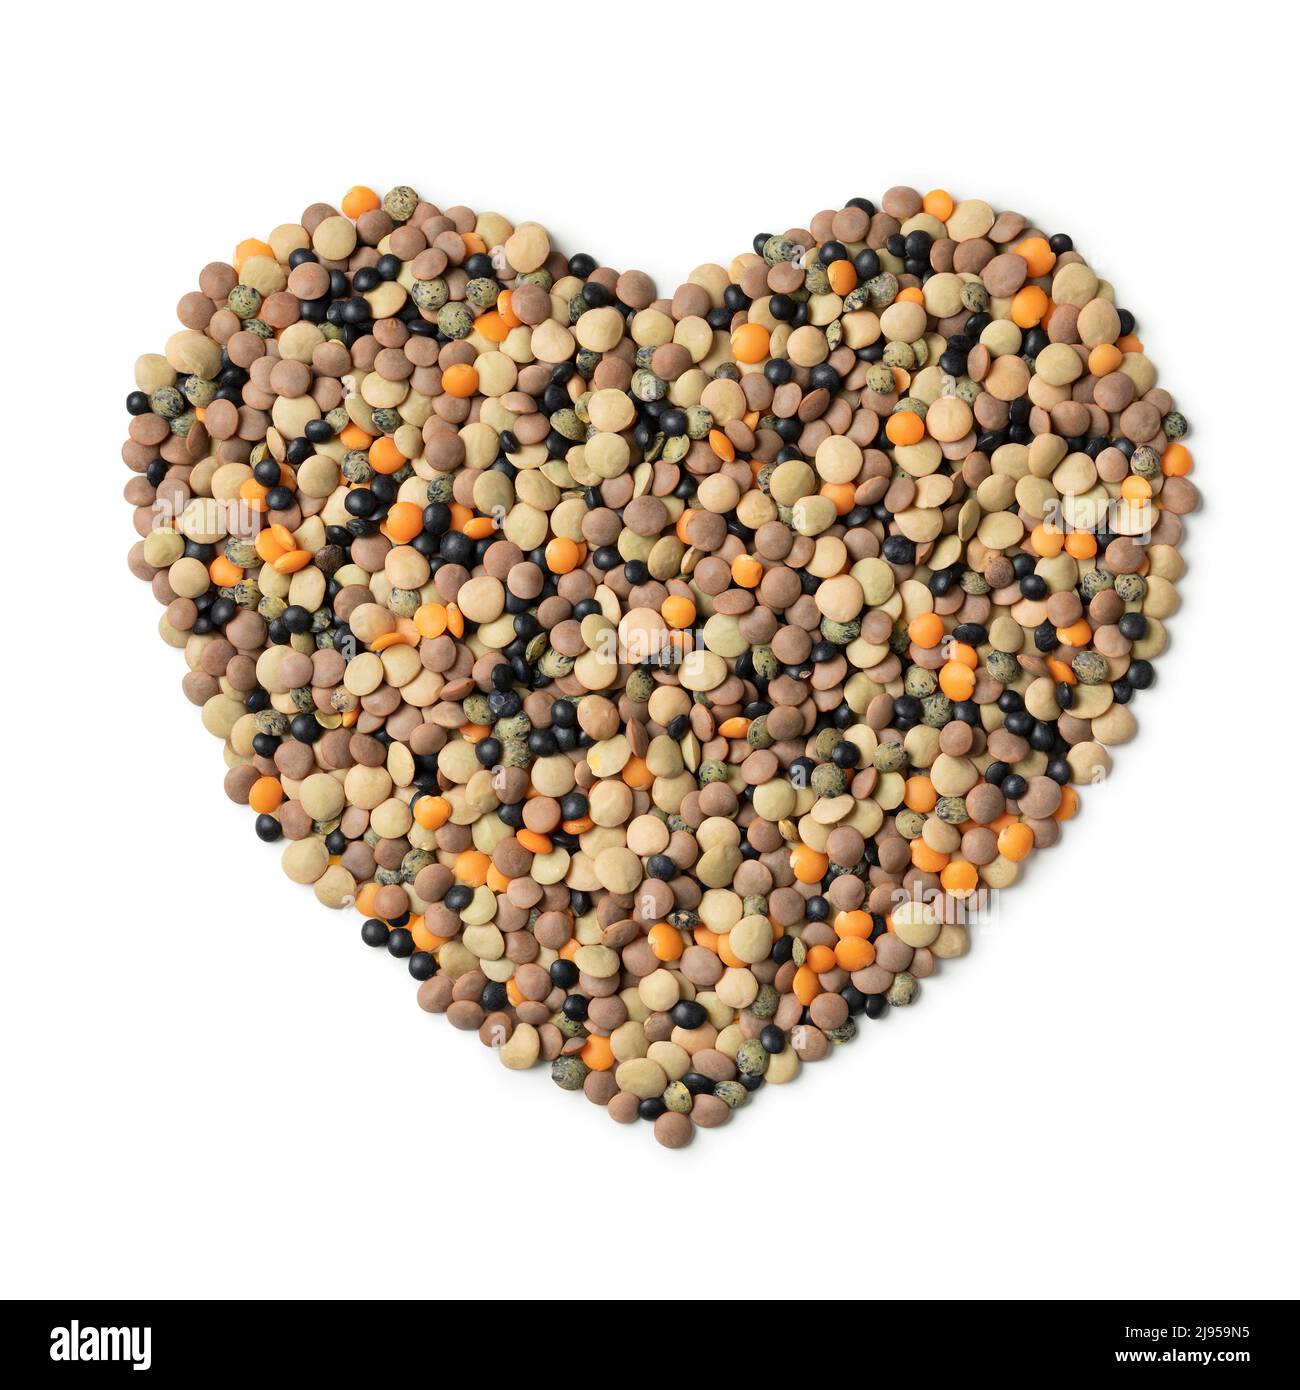 Mixture of different type lentils in heart shape isolated on white background Stock Photo